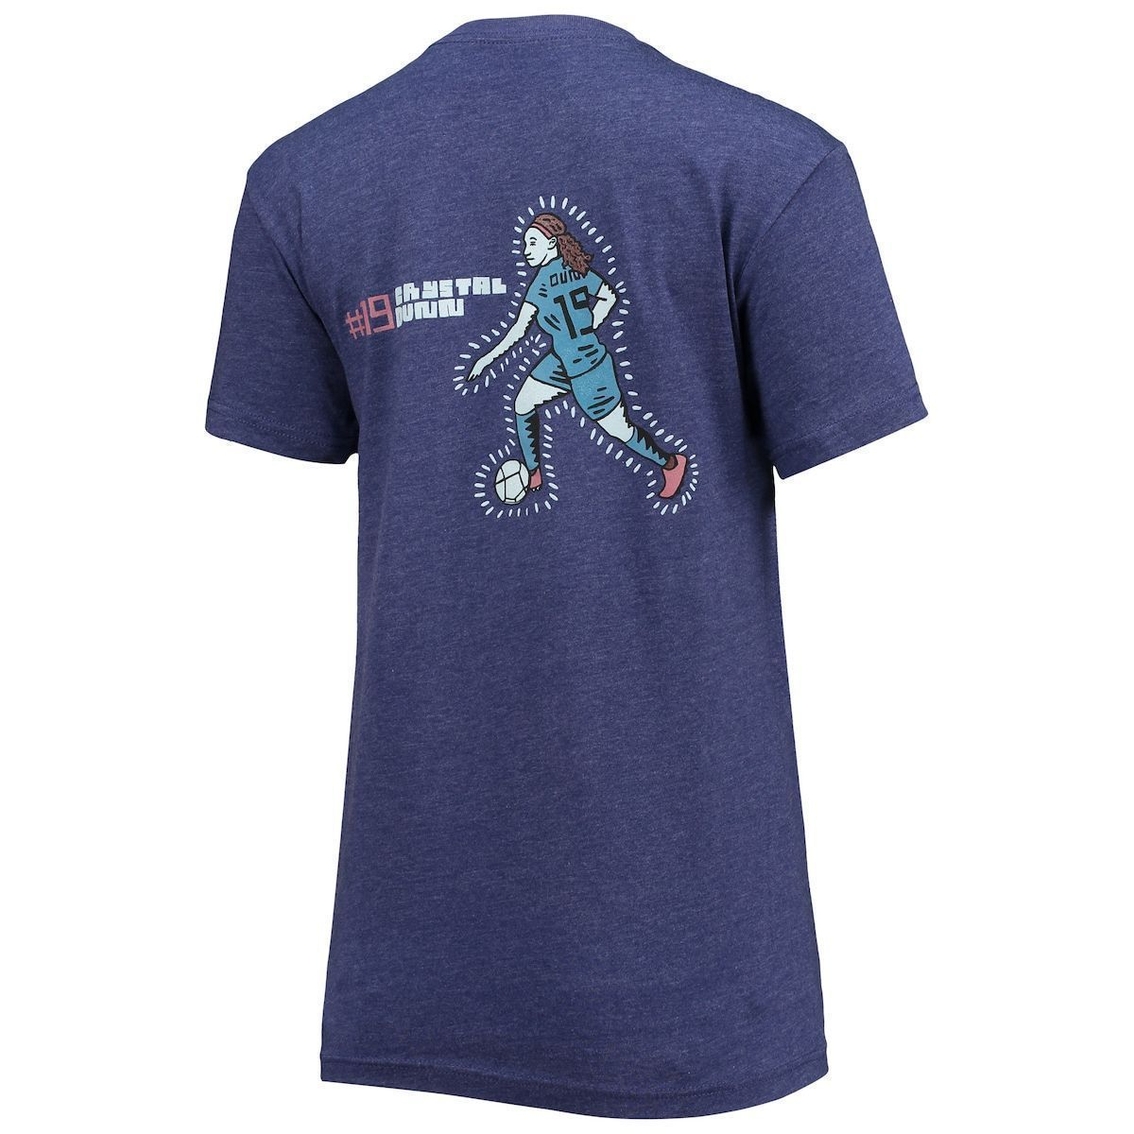 round21 Women's round21 Crystal Dunn Navy USWNT One Team One Goal T-Shirt - Image 4 of 4